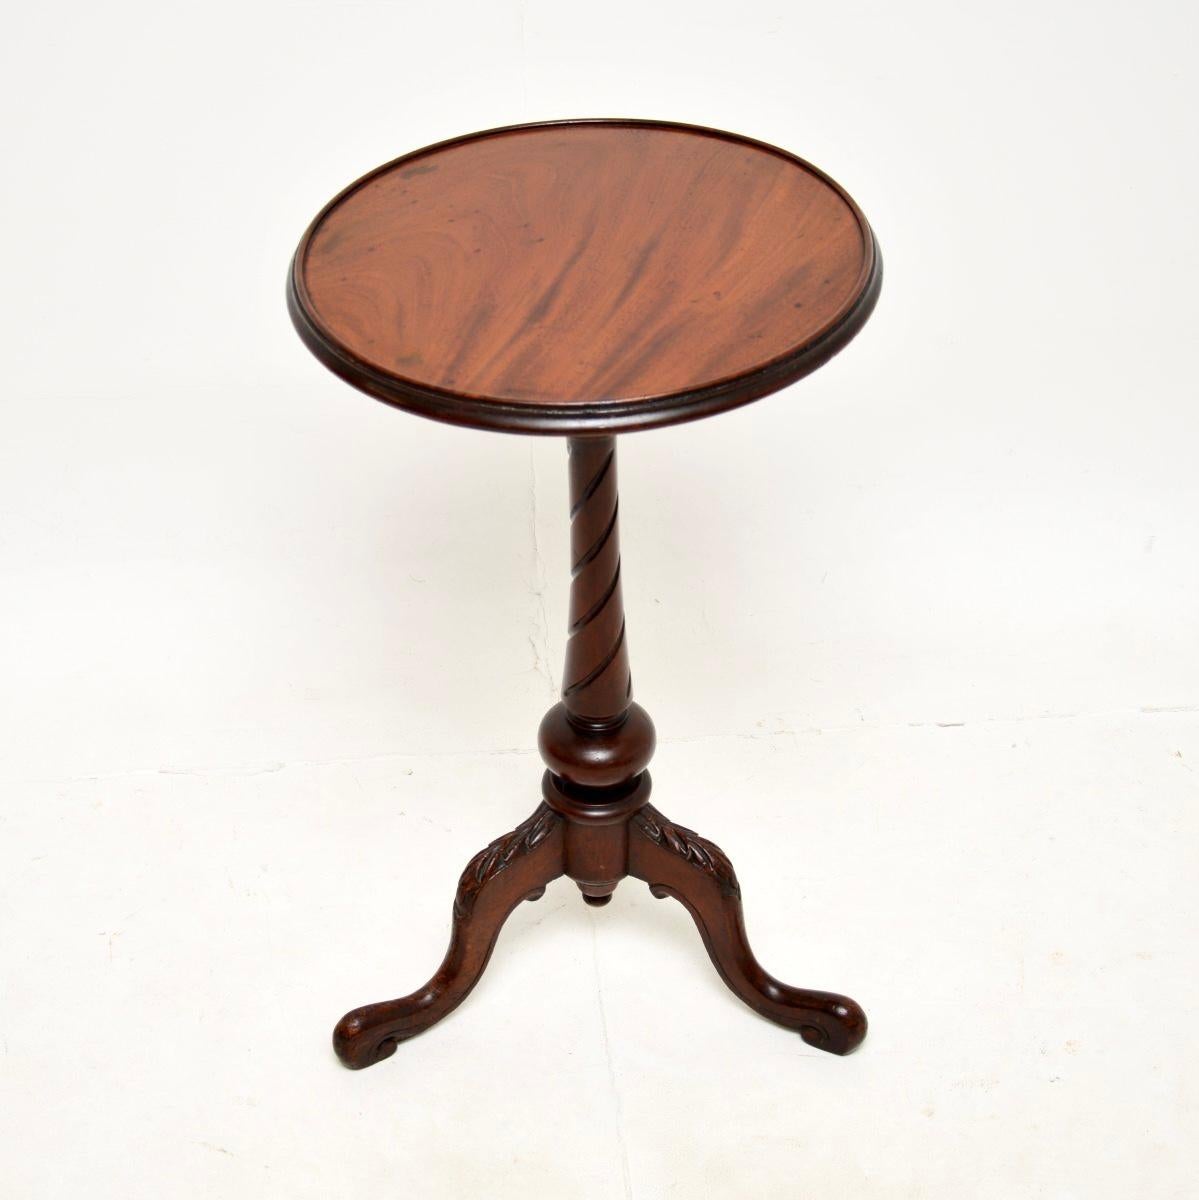 A wonderful antique Victorian occasional side table. This was made in England, it dates from around the 1860-1880 period.

It is of extremely fine quality, with solid construction throughout. The circular top sits on a beautiful spiral twisted base